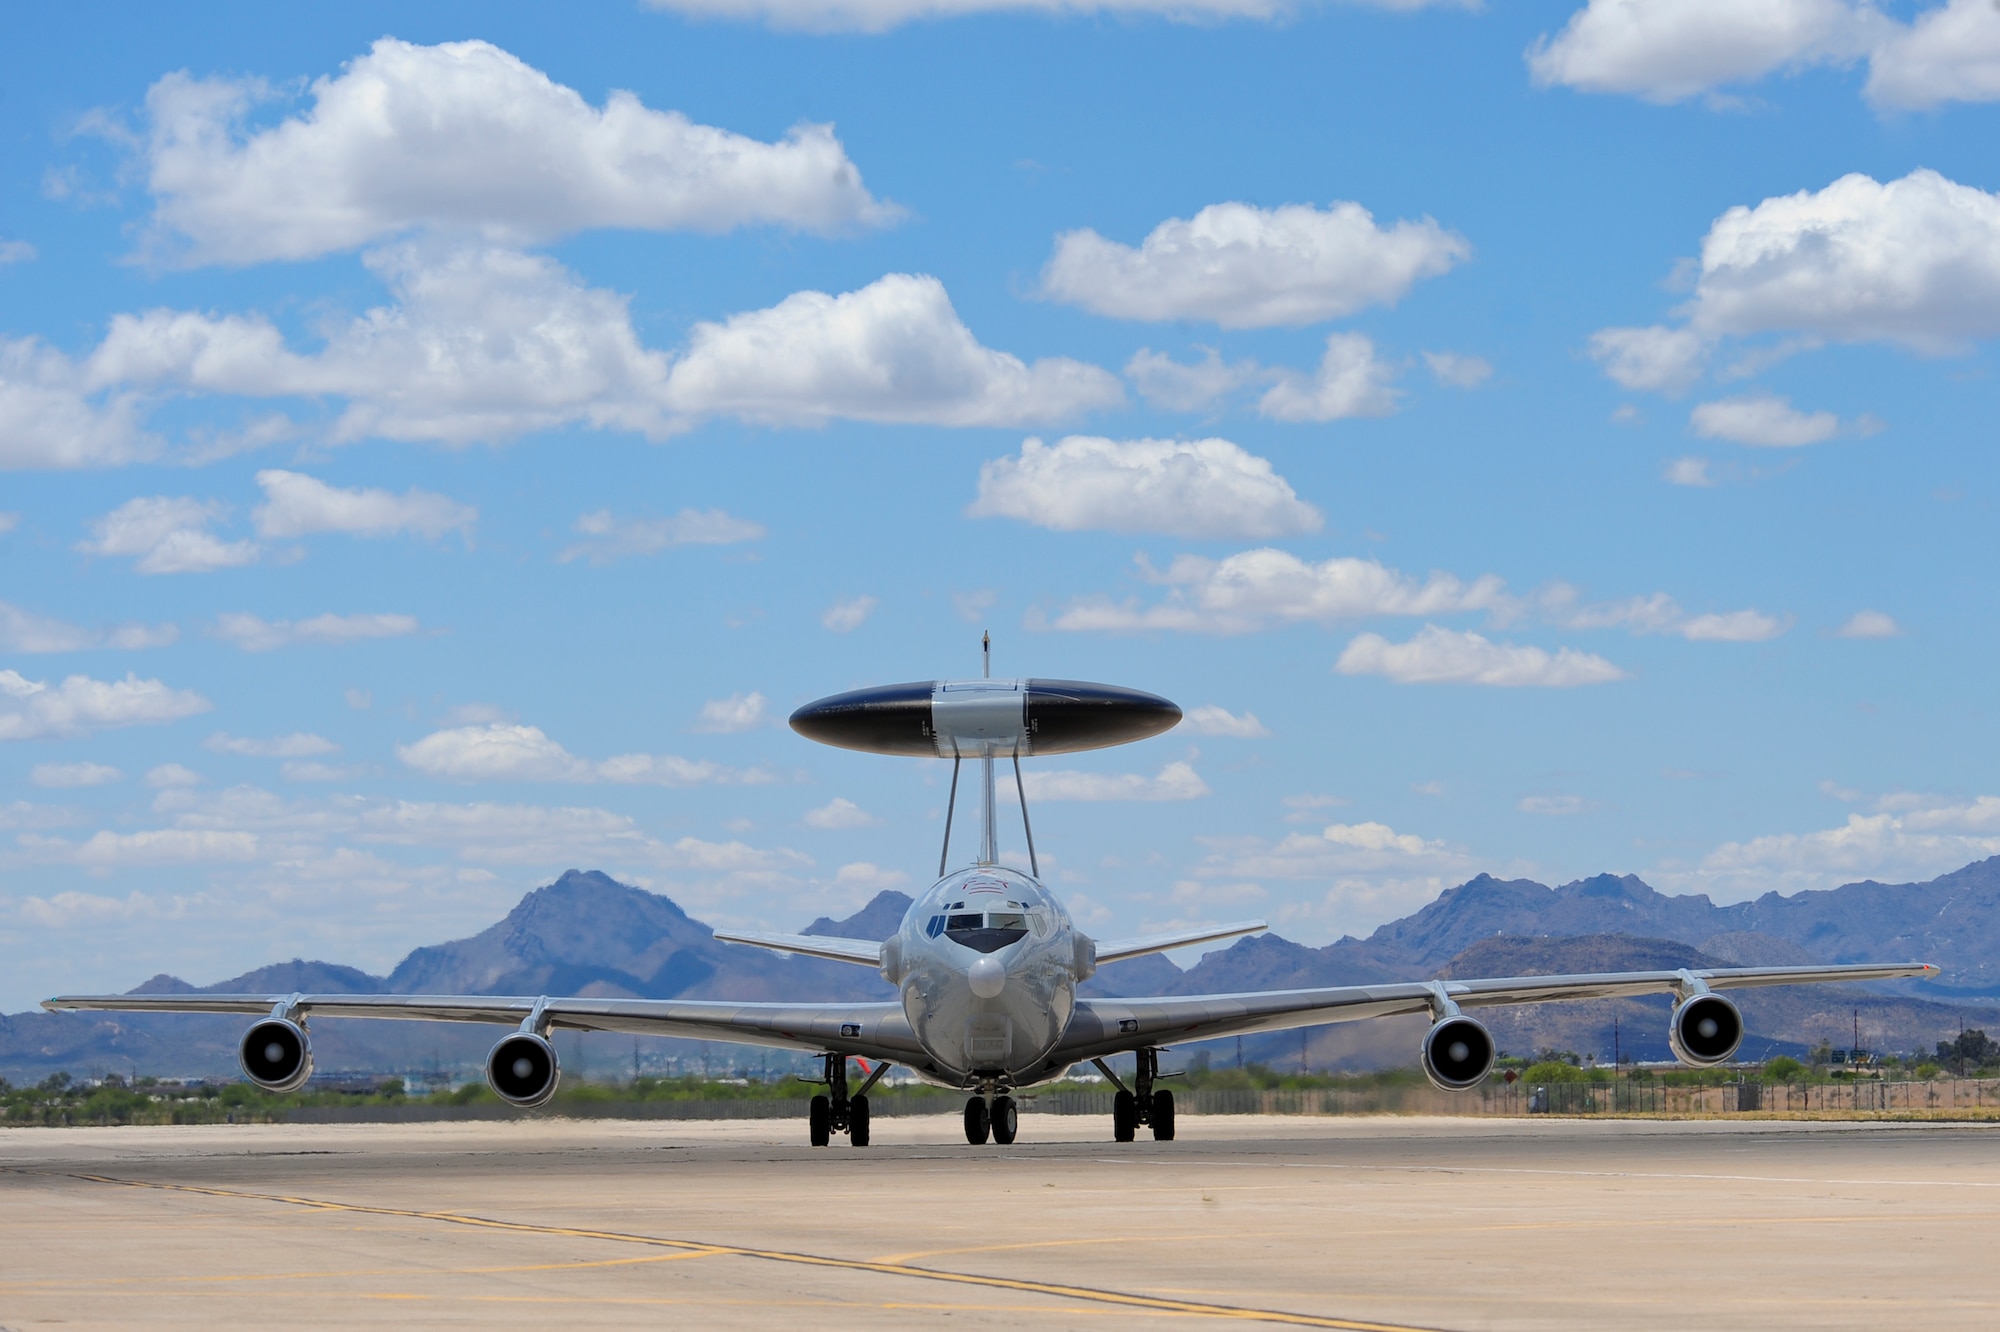 An E-3 Sentry (AWACS) from Tinker Air Force Base, Okla., taxis on the flightline at Davis-Monthan AFB, Ariz., May 16, 2015. Eight AWACS arrived here due to tornado alerts in Oklahoma. (U.S. Air Force photo/Airman 1st Class Chris Massey)